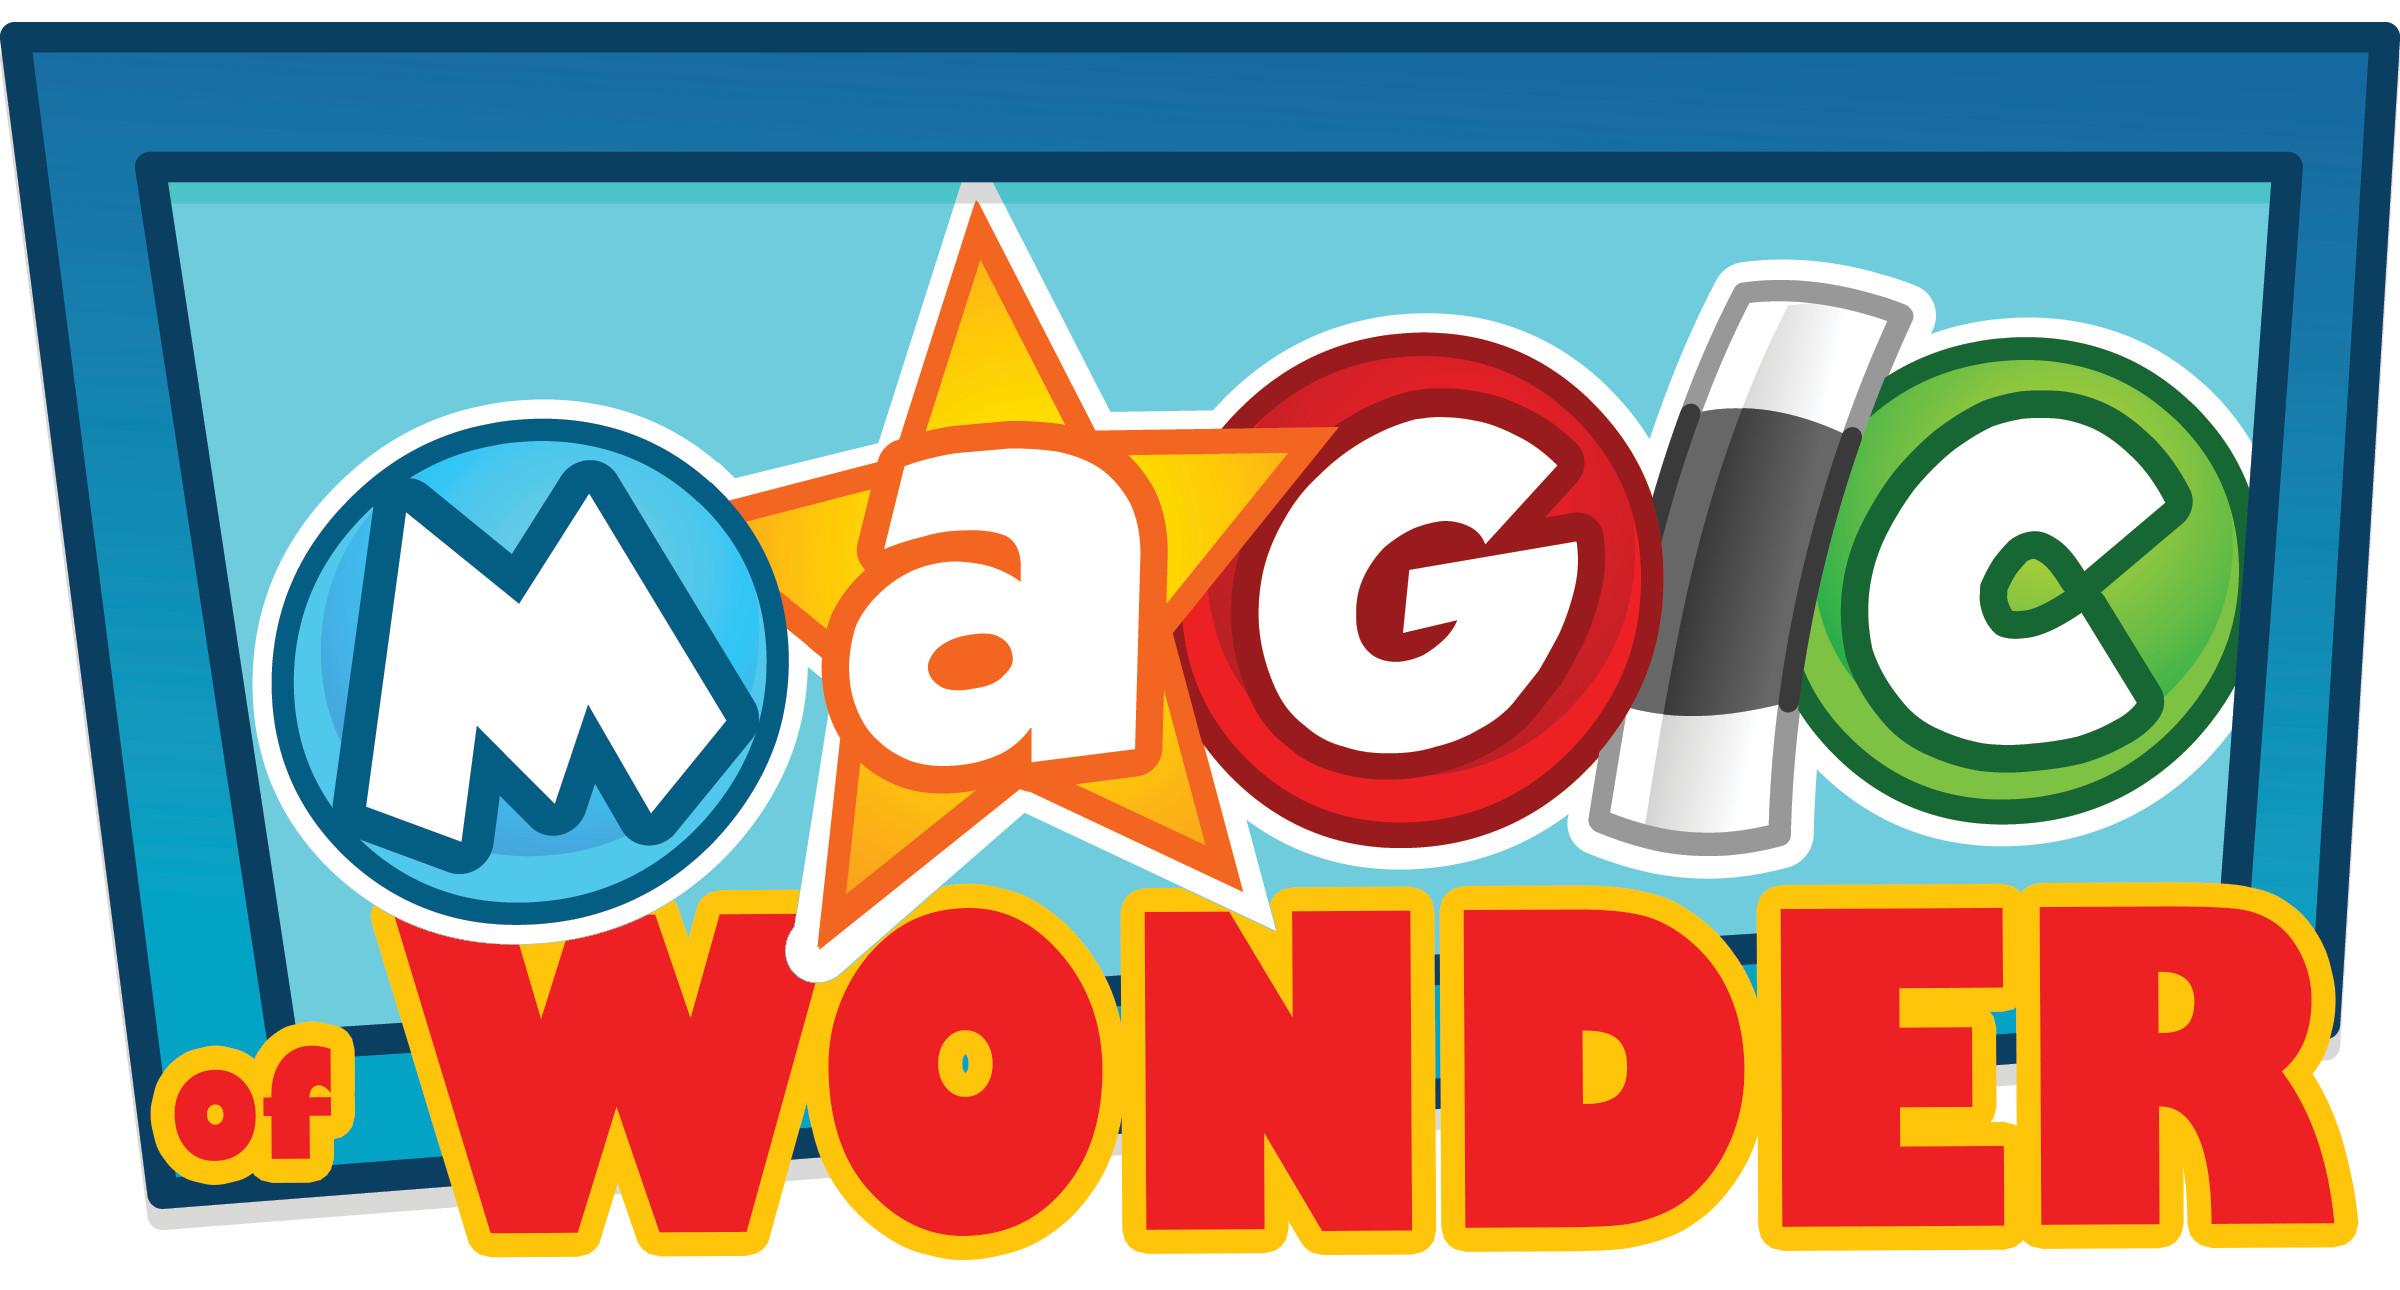 Chad Wonders Logo colorful Yellow Chad and Red Wonder with a stylized Magic